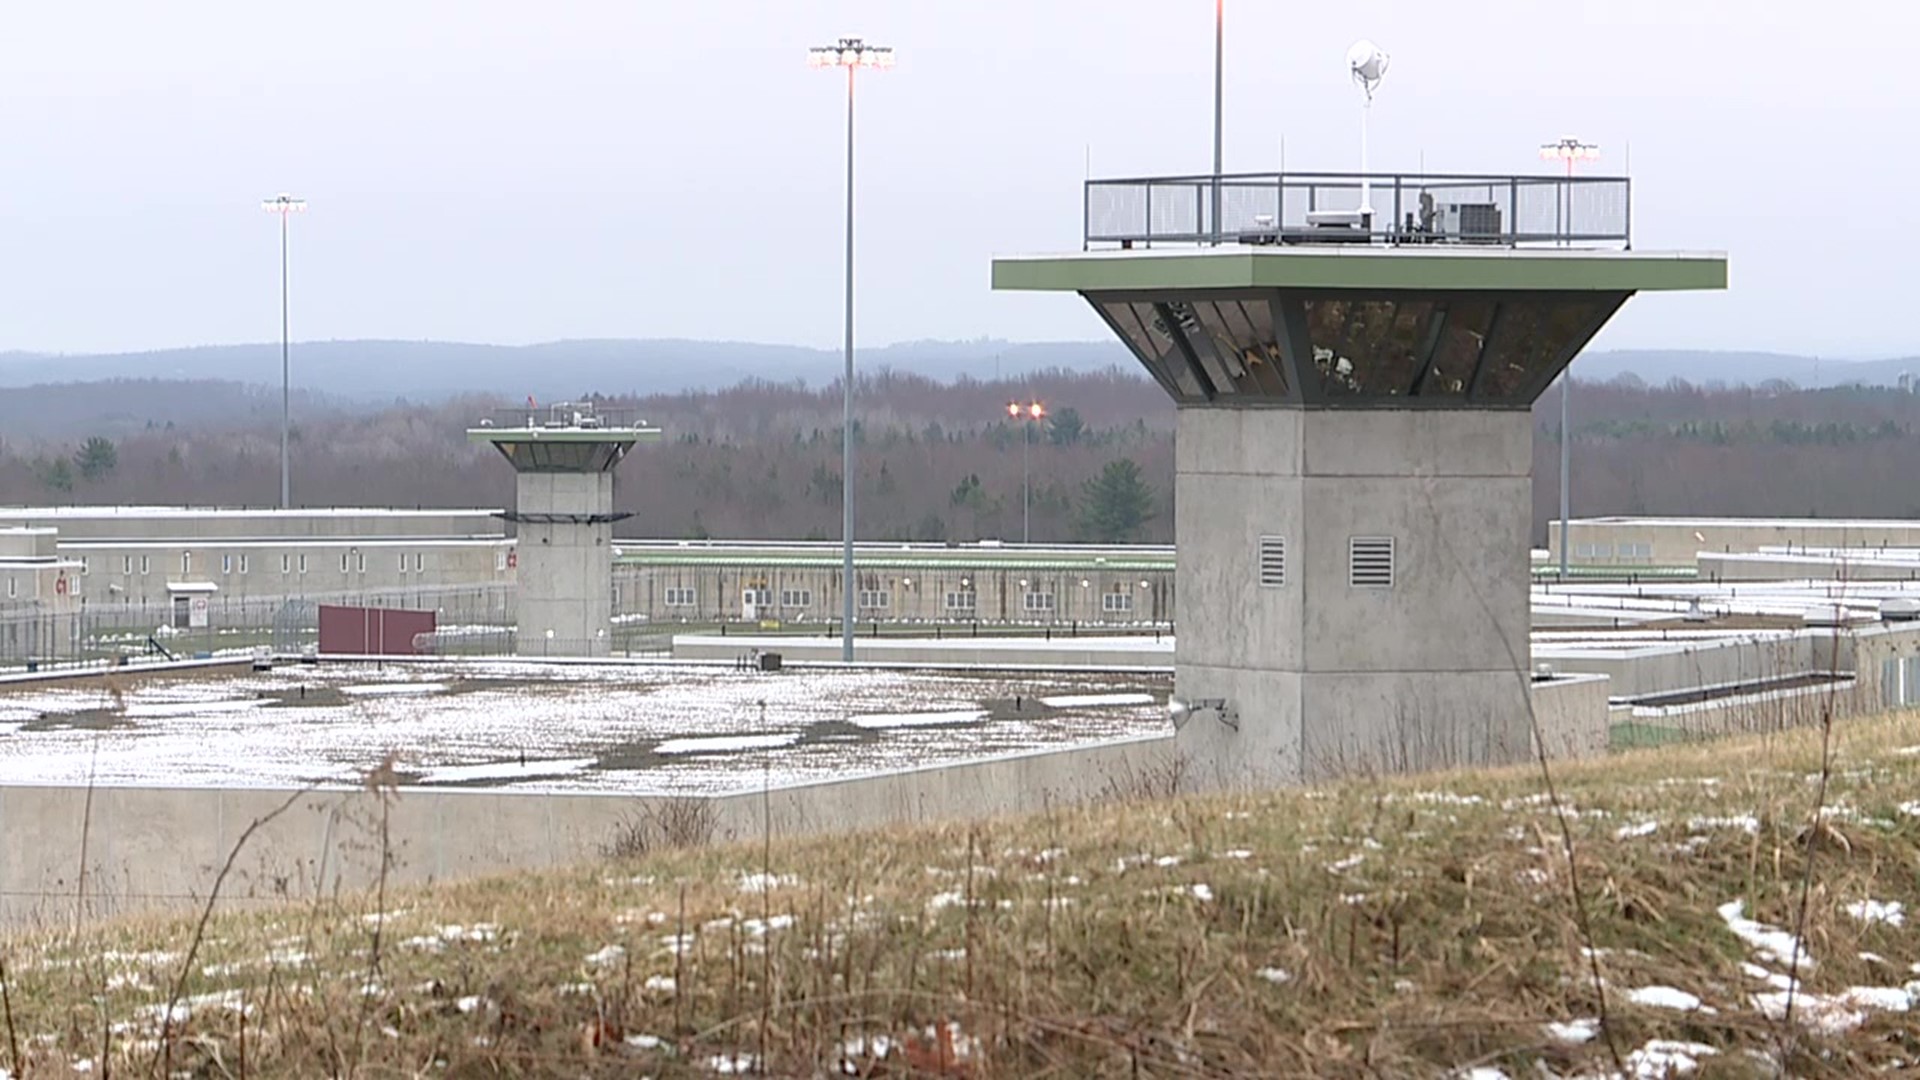 The federal prison near Waymart would appear to be business as usual but that's not the case from the inside